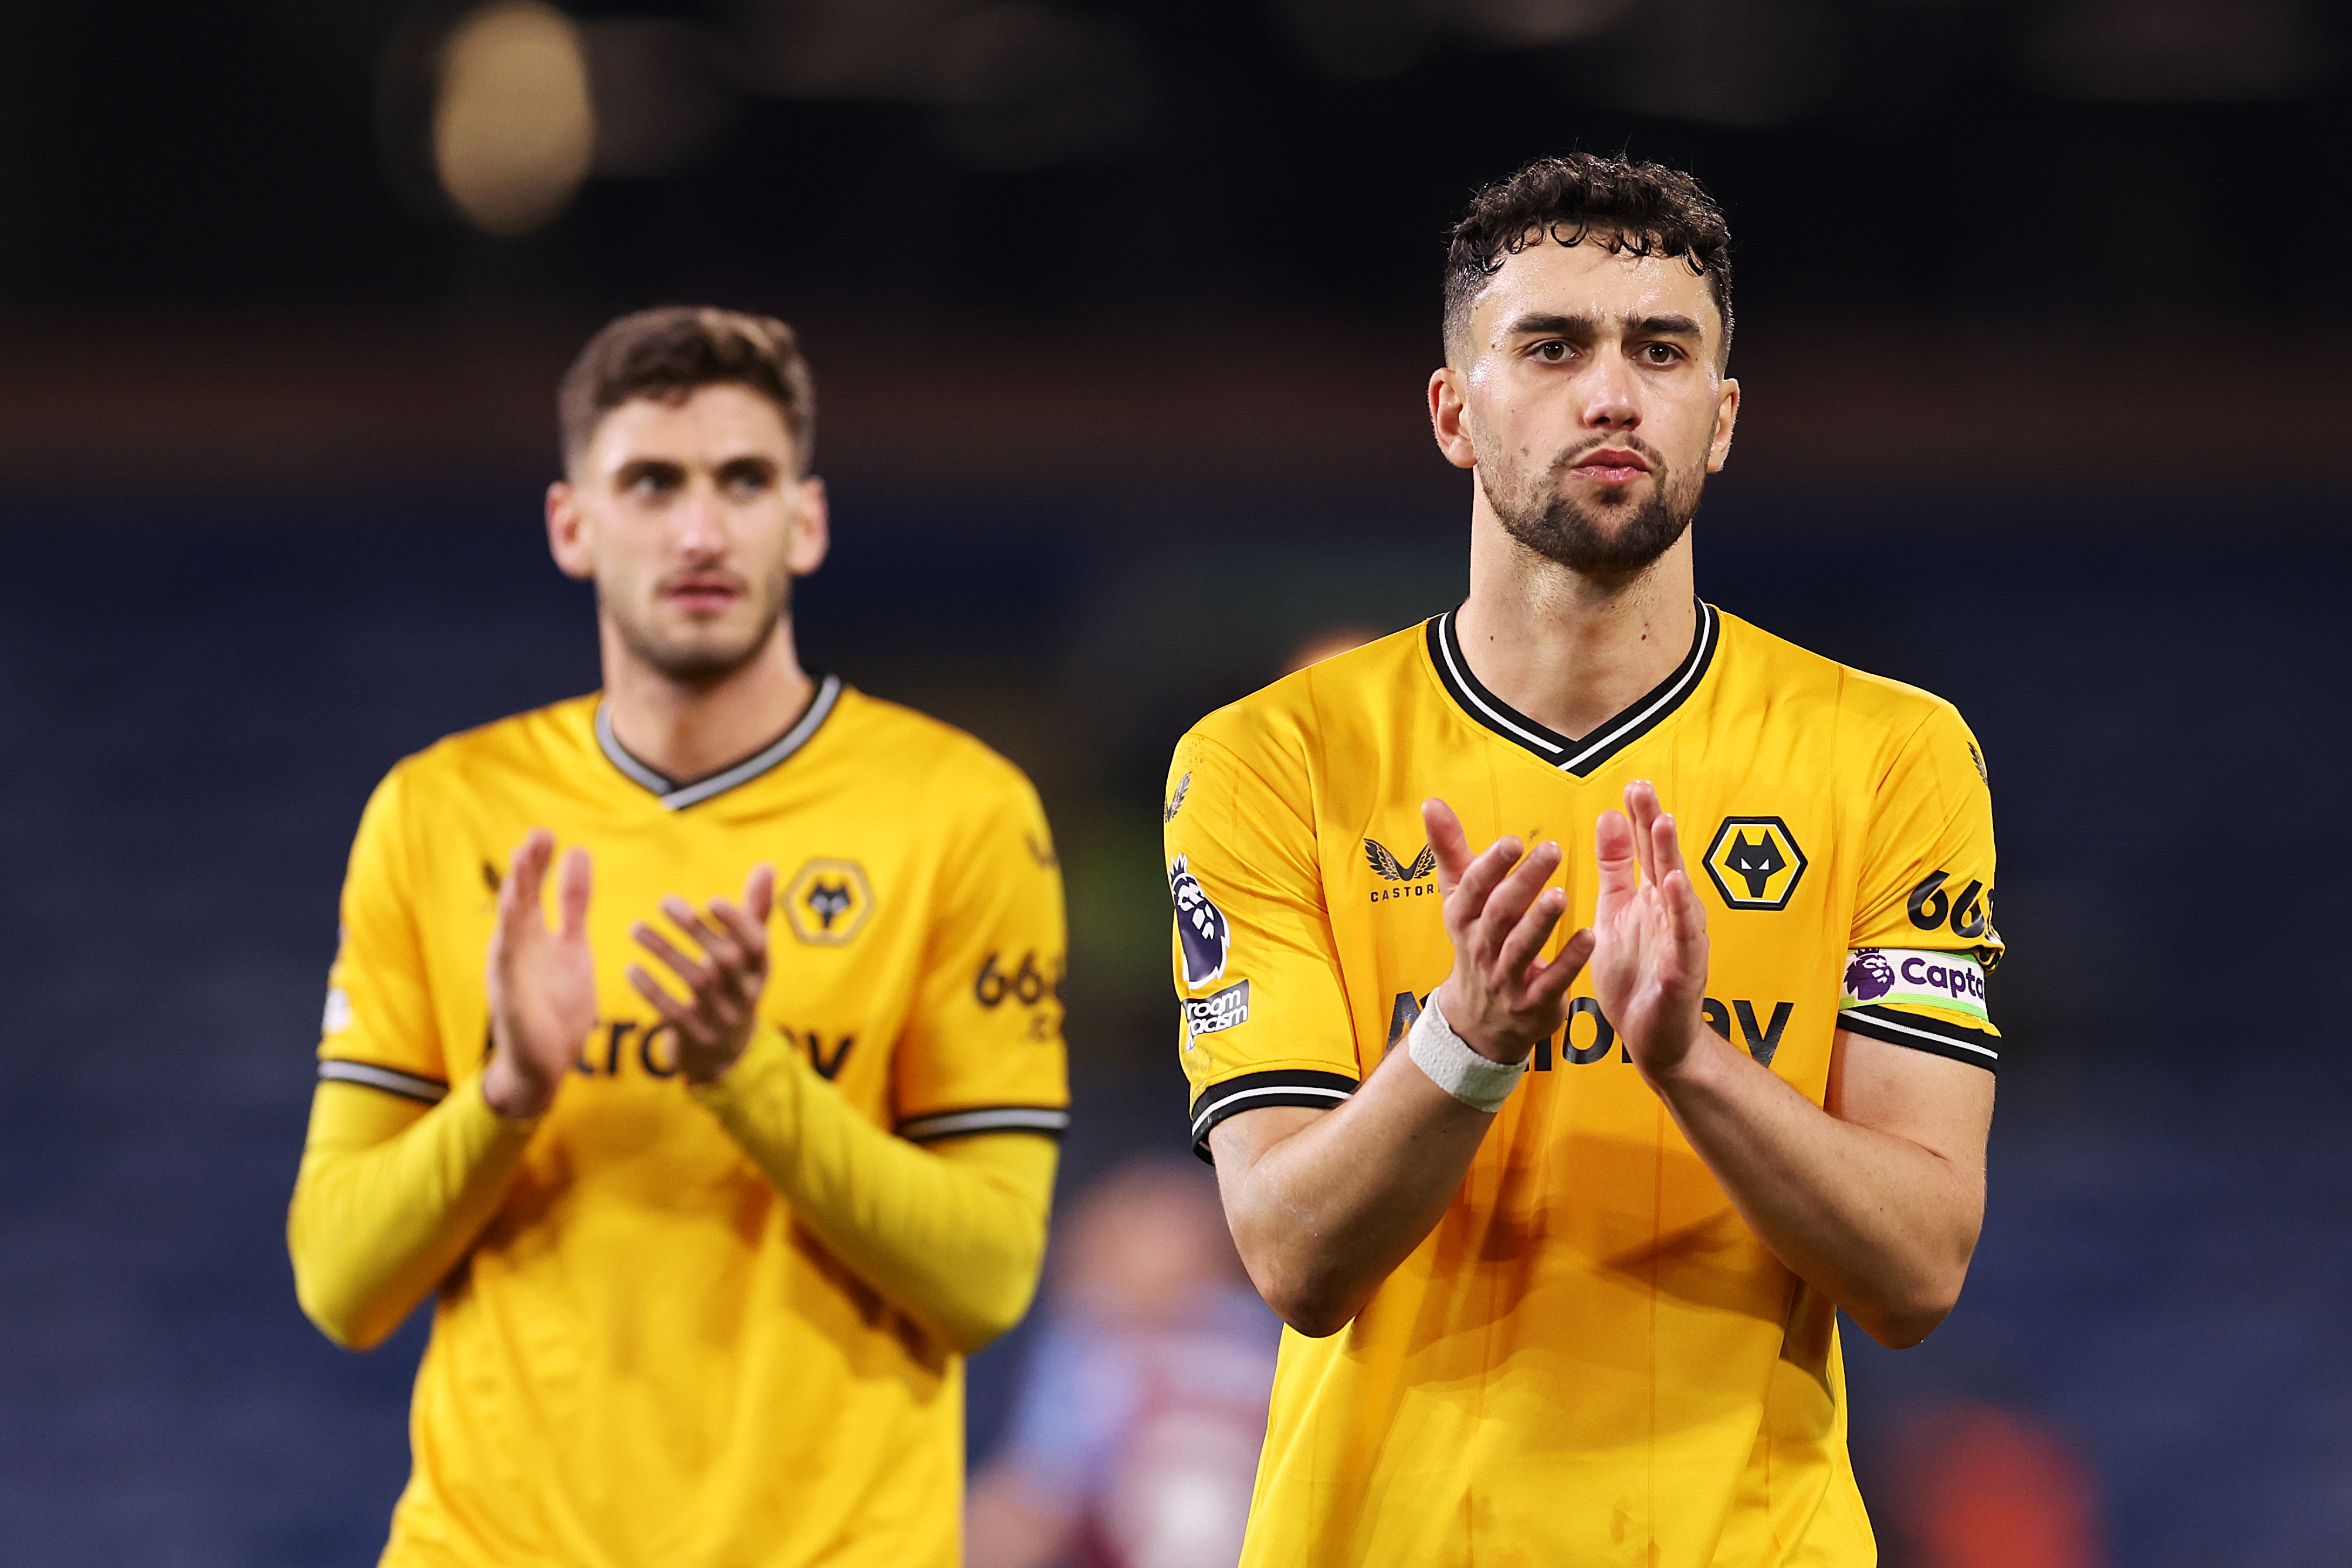 Wolves will be hoping to capitalise on Arsenal's form